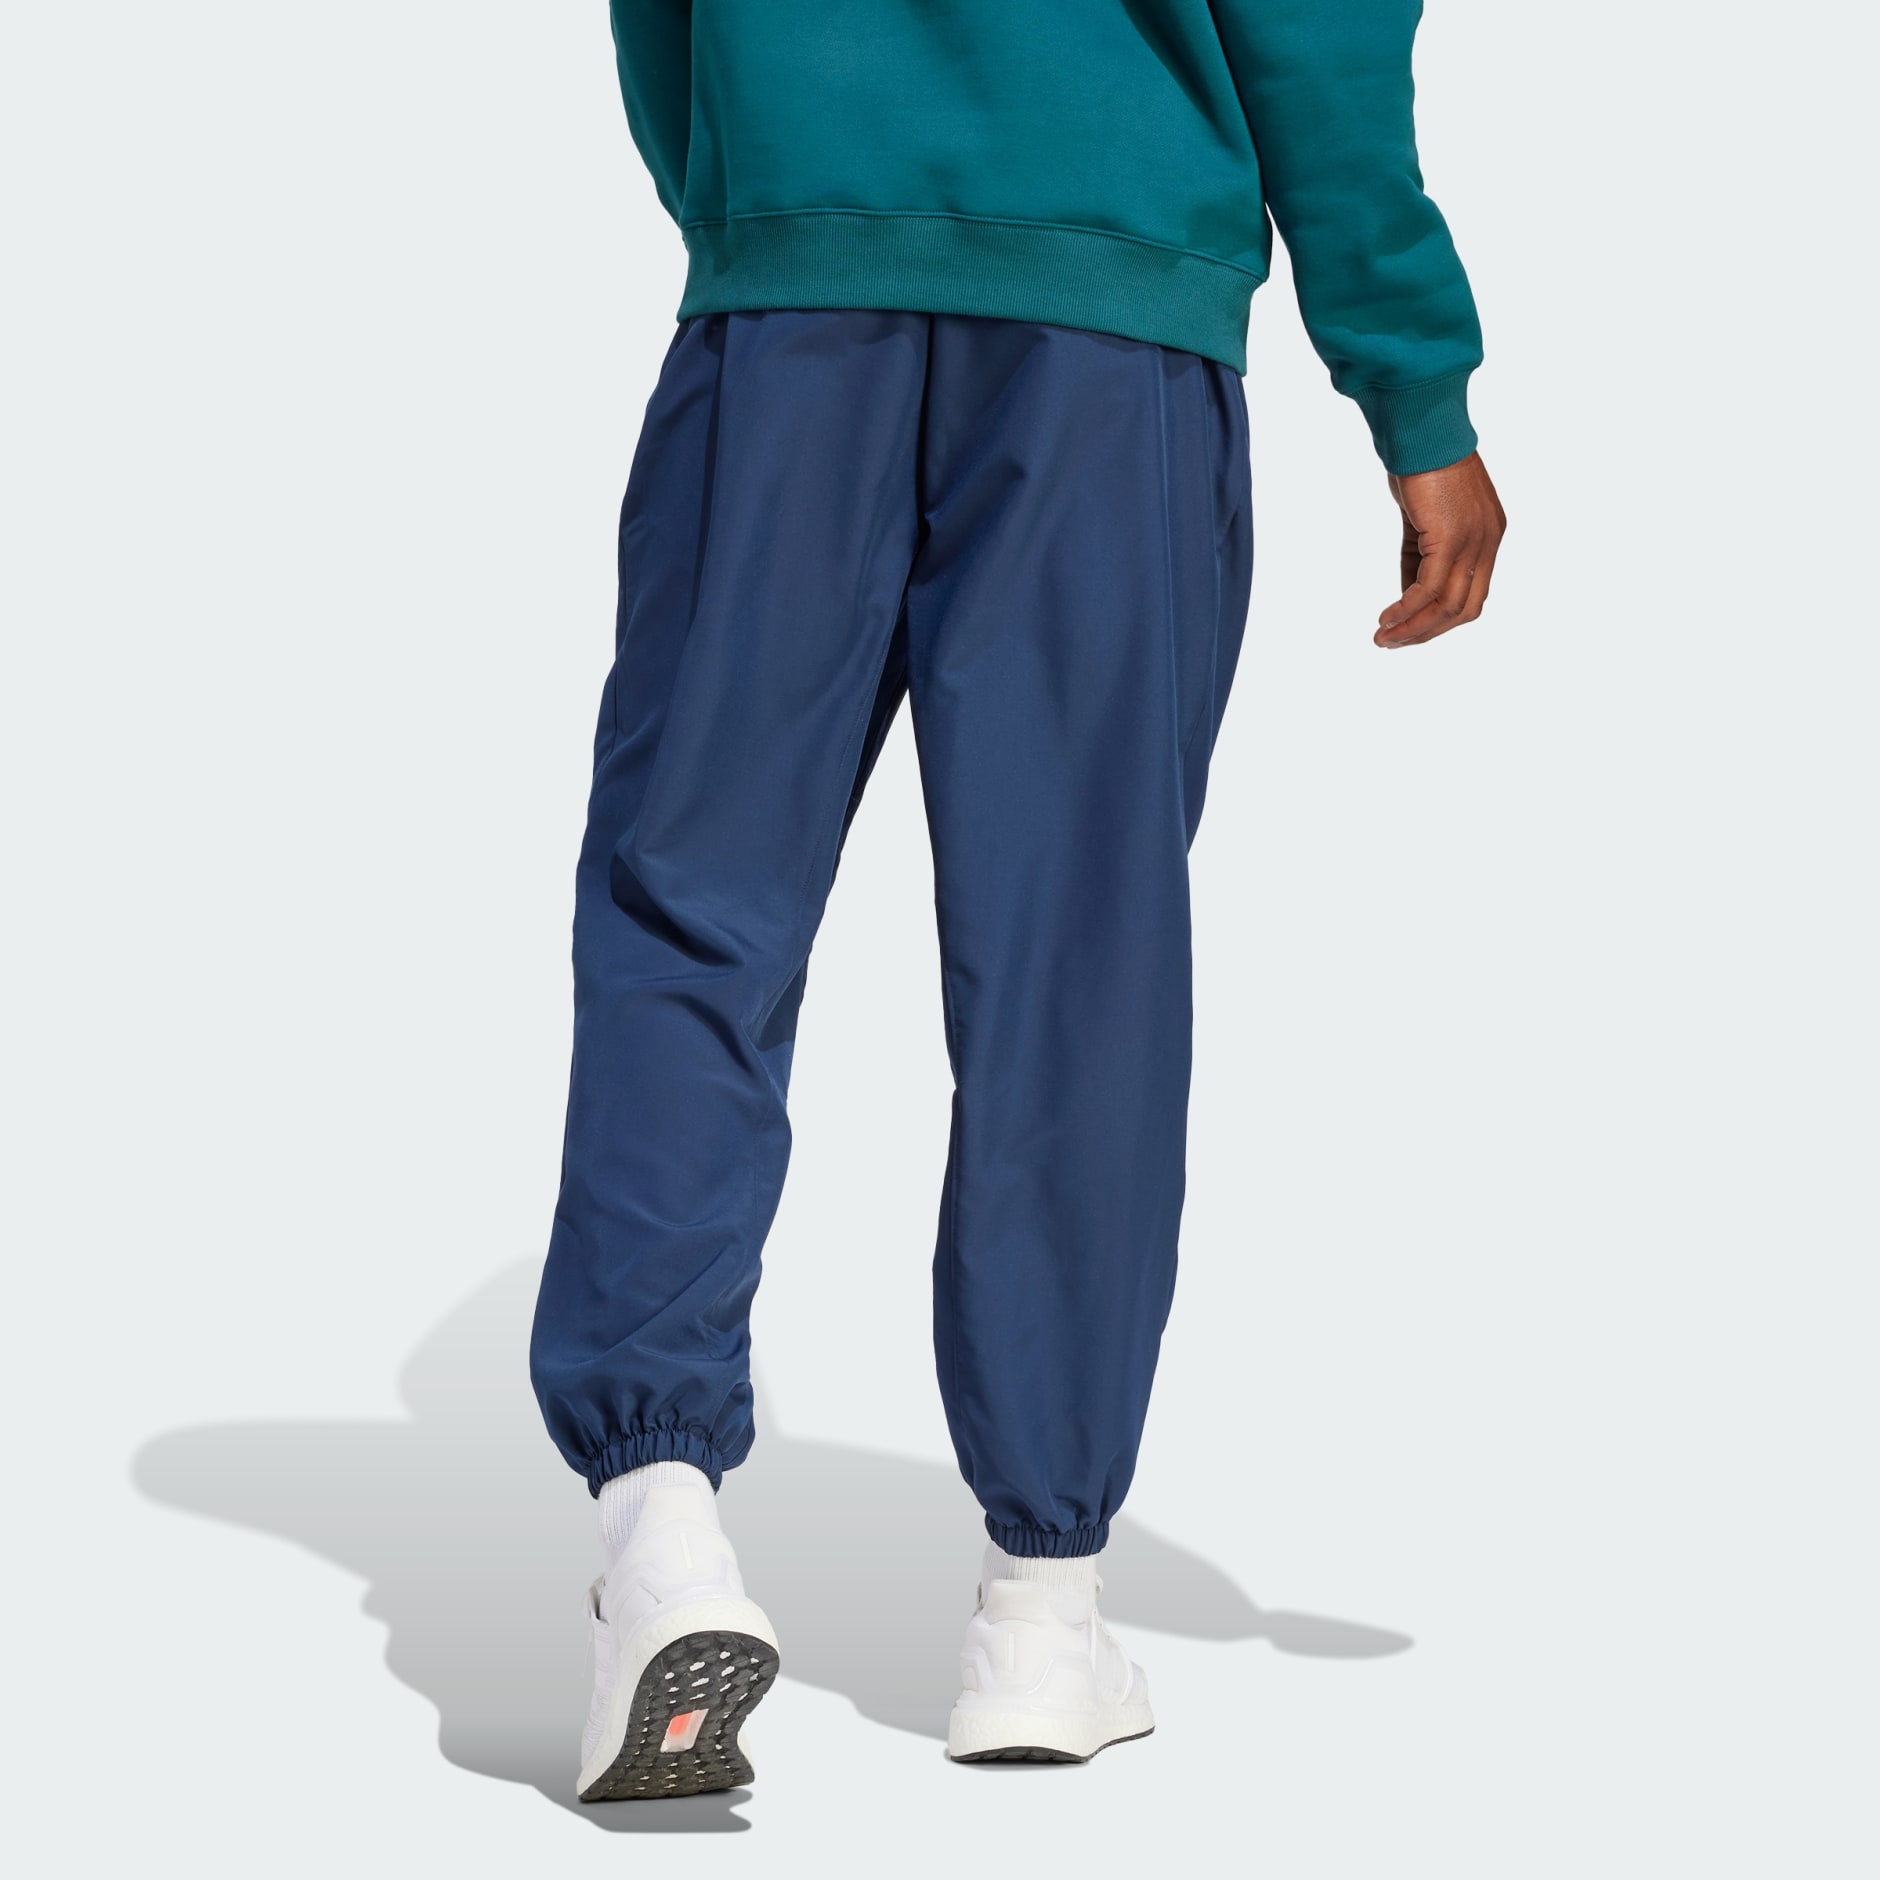 Clothing - Arsenal LFSTLR Woven Pants - Blue | adidas South Africa